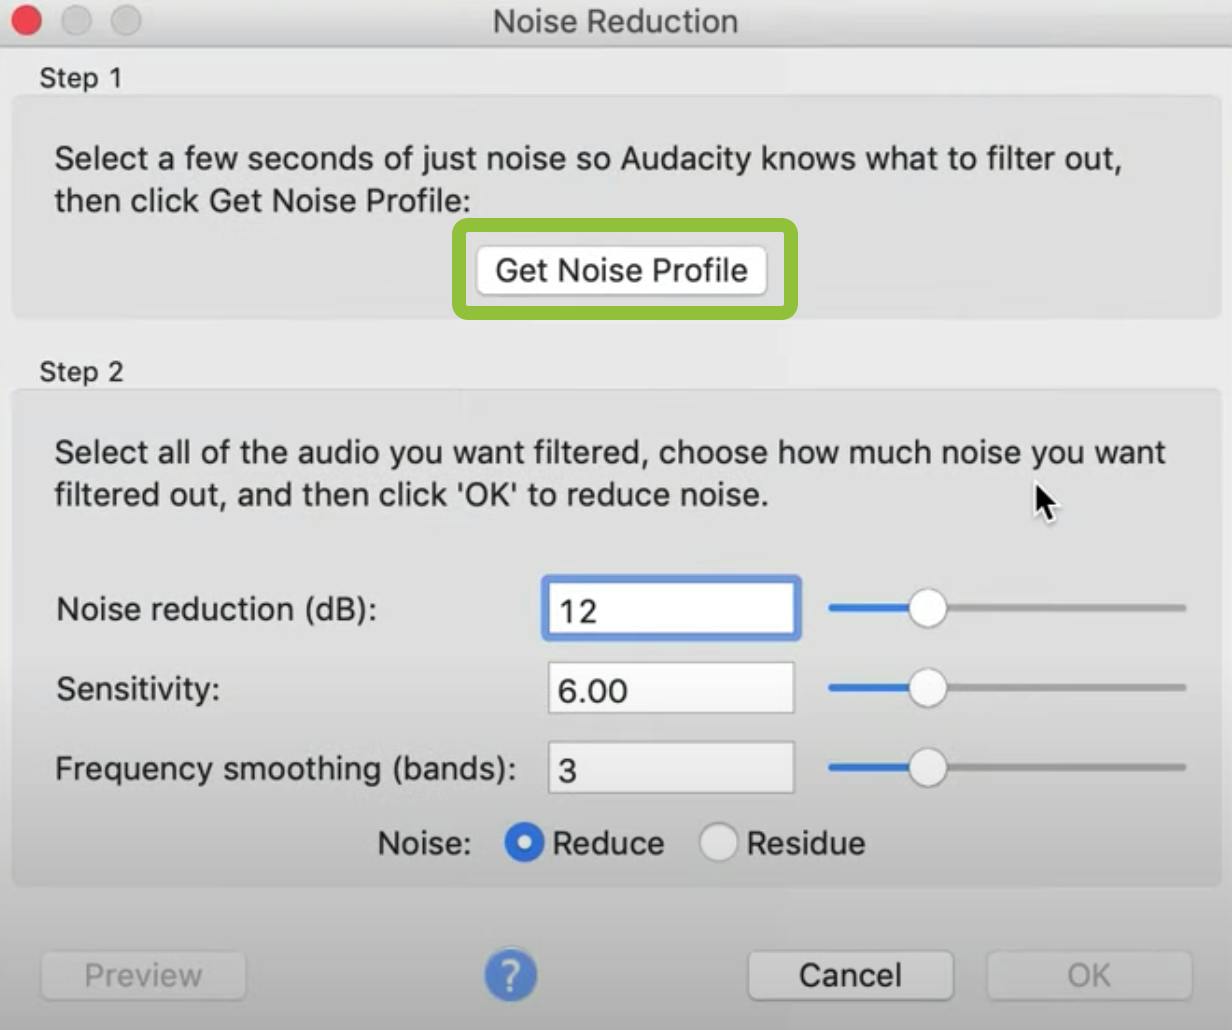 Audacity noise reduction download five nights at freddys 4 apk free download